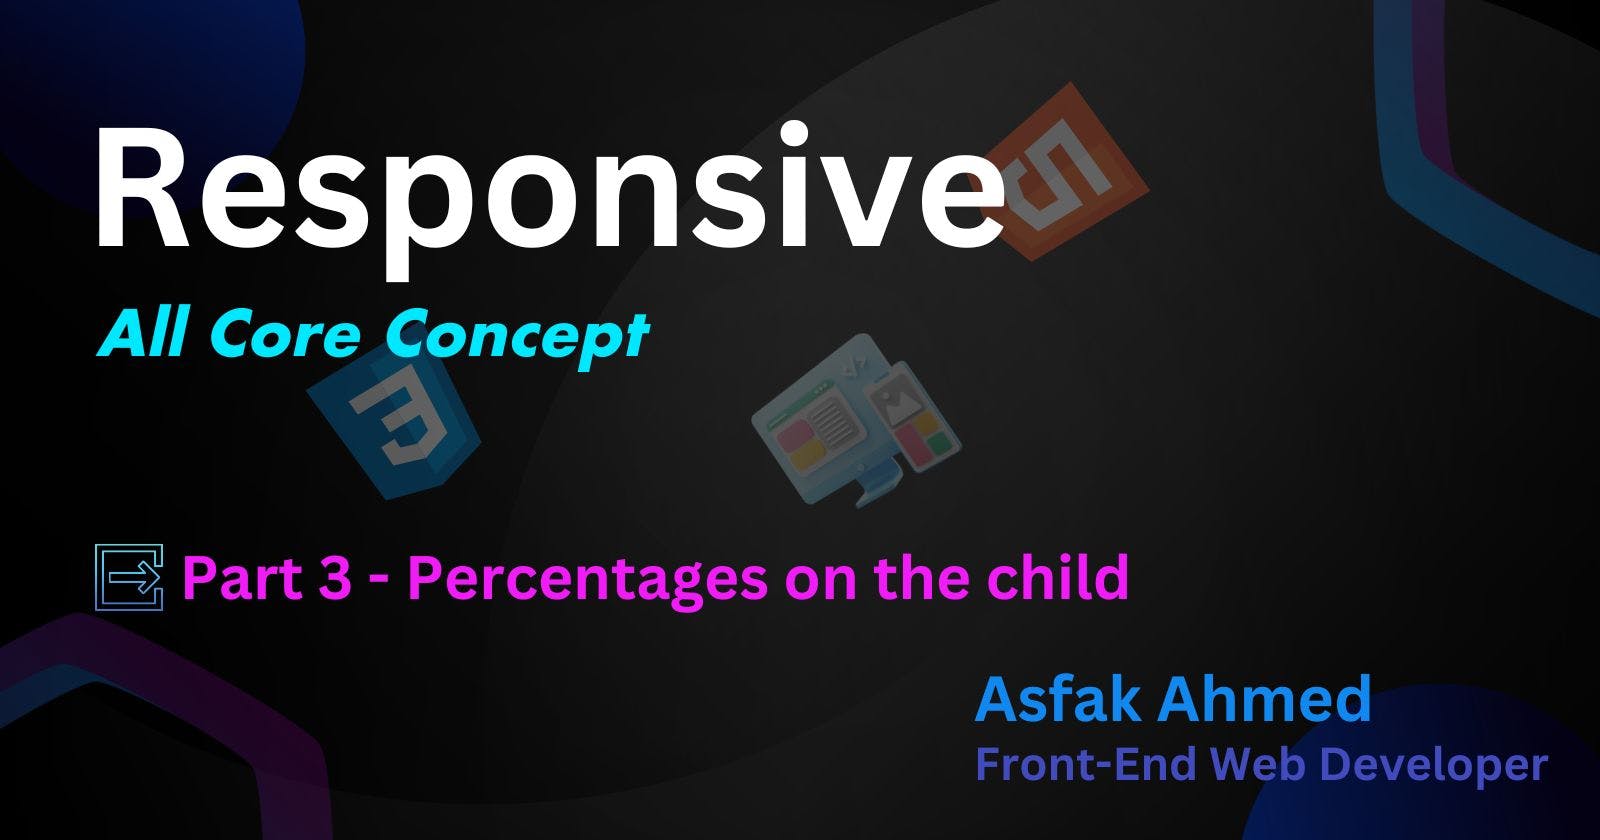 Responsive ( all core concept ) Part 3 - Percentages on the child